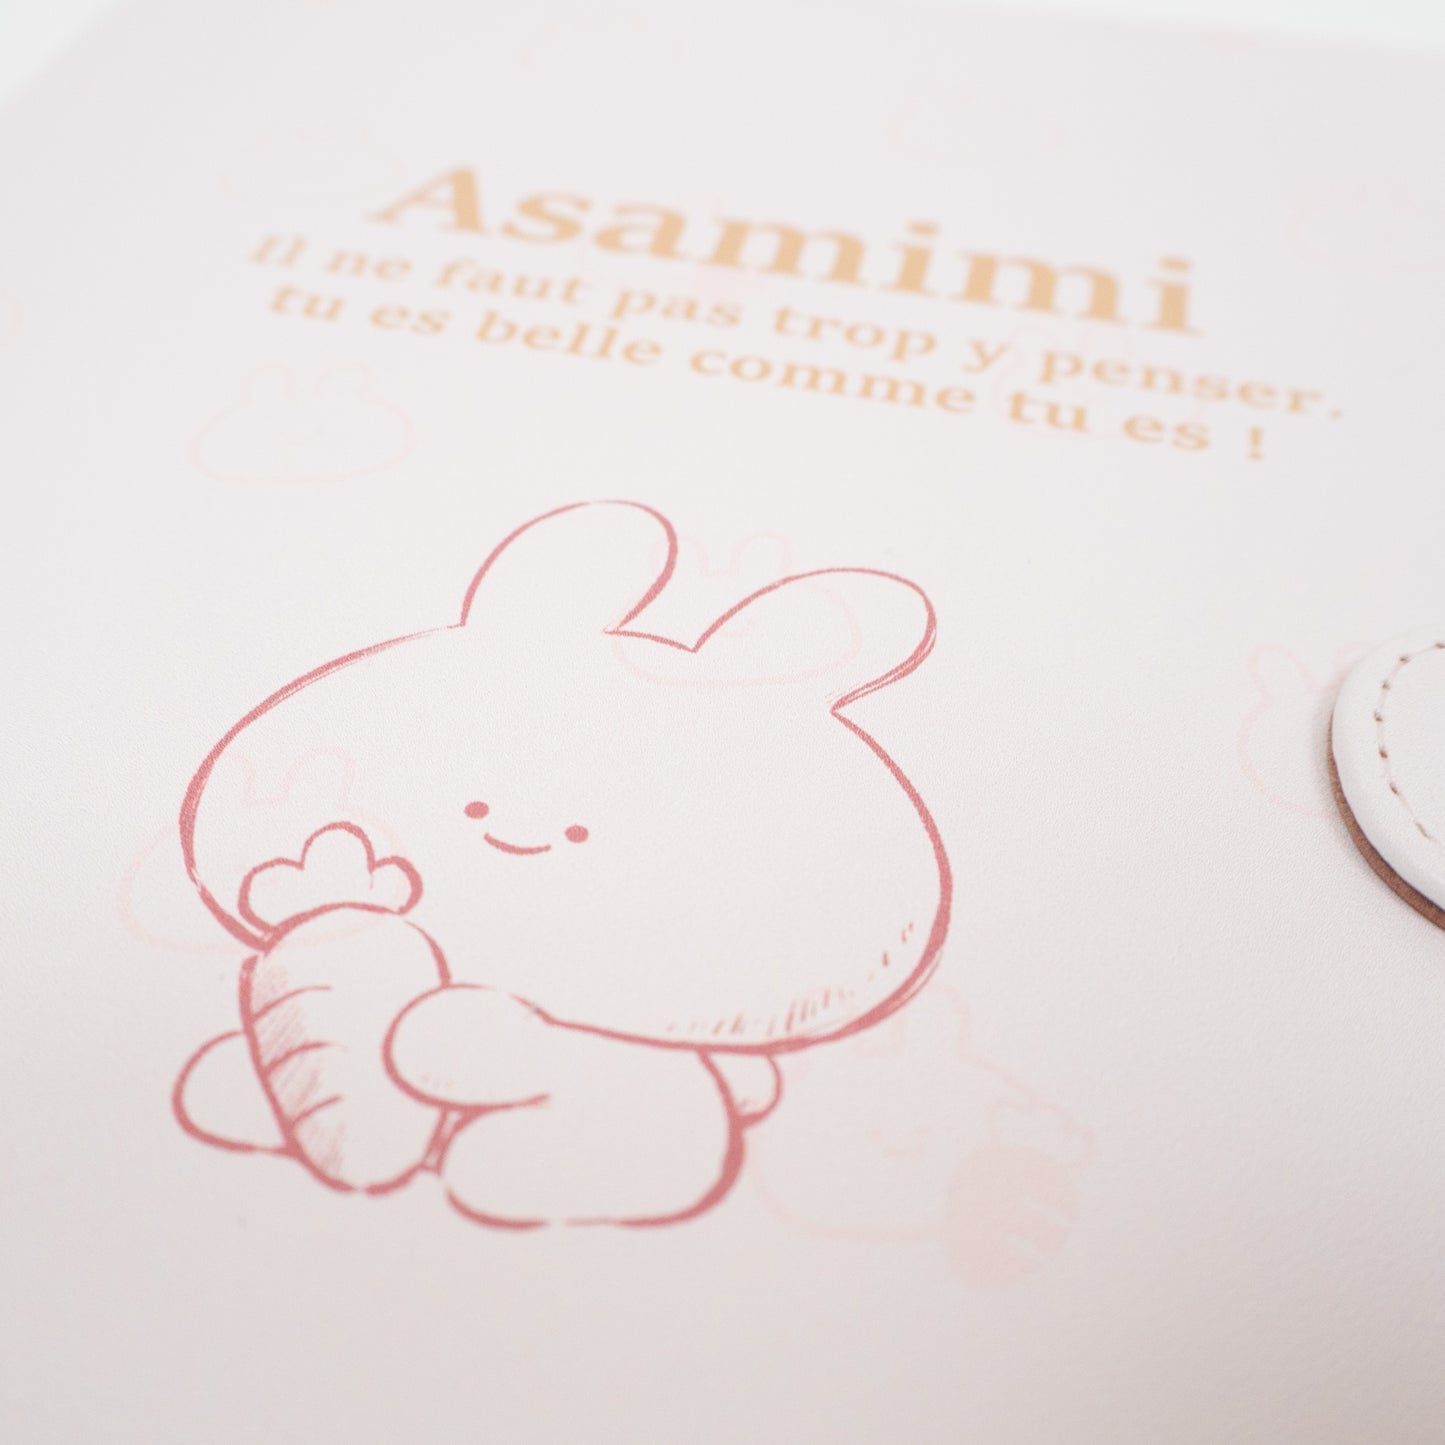 [Asamimi-chan] Synthetic Leather Book Cover (French Girly) [Shipped in early December]